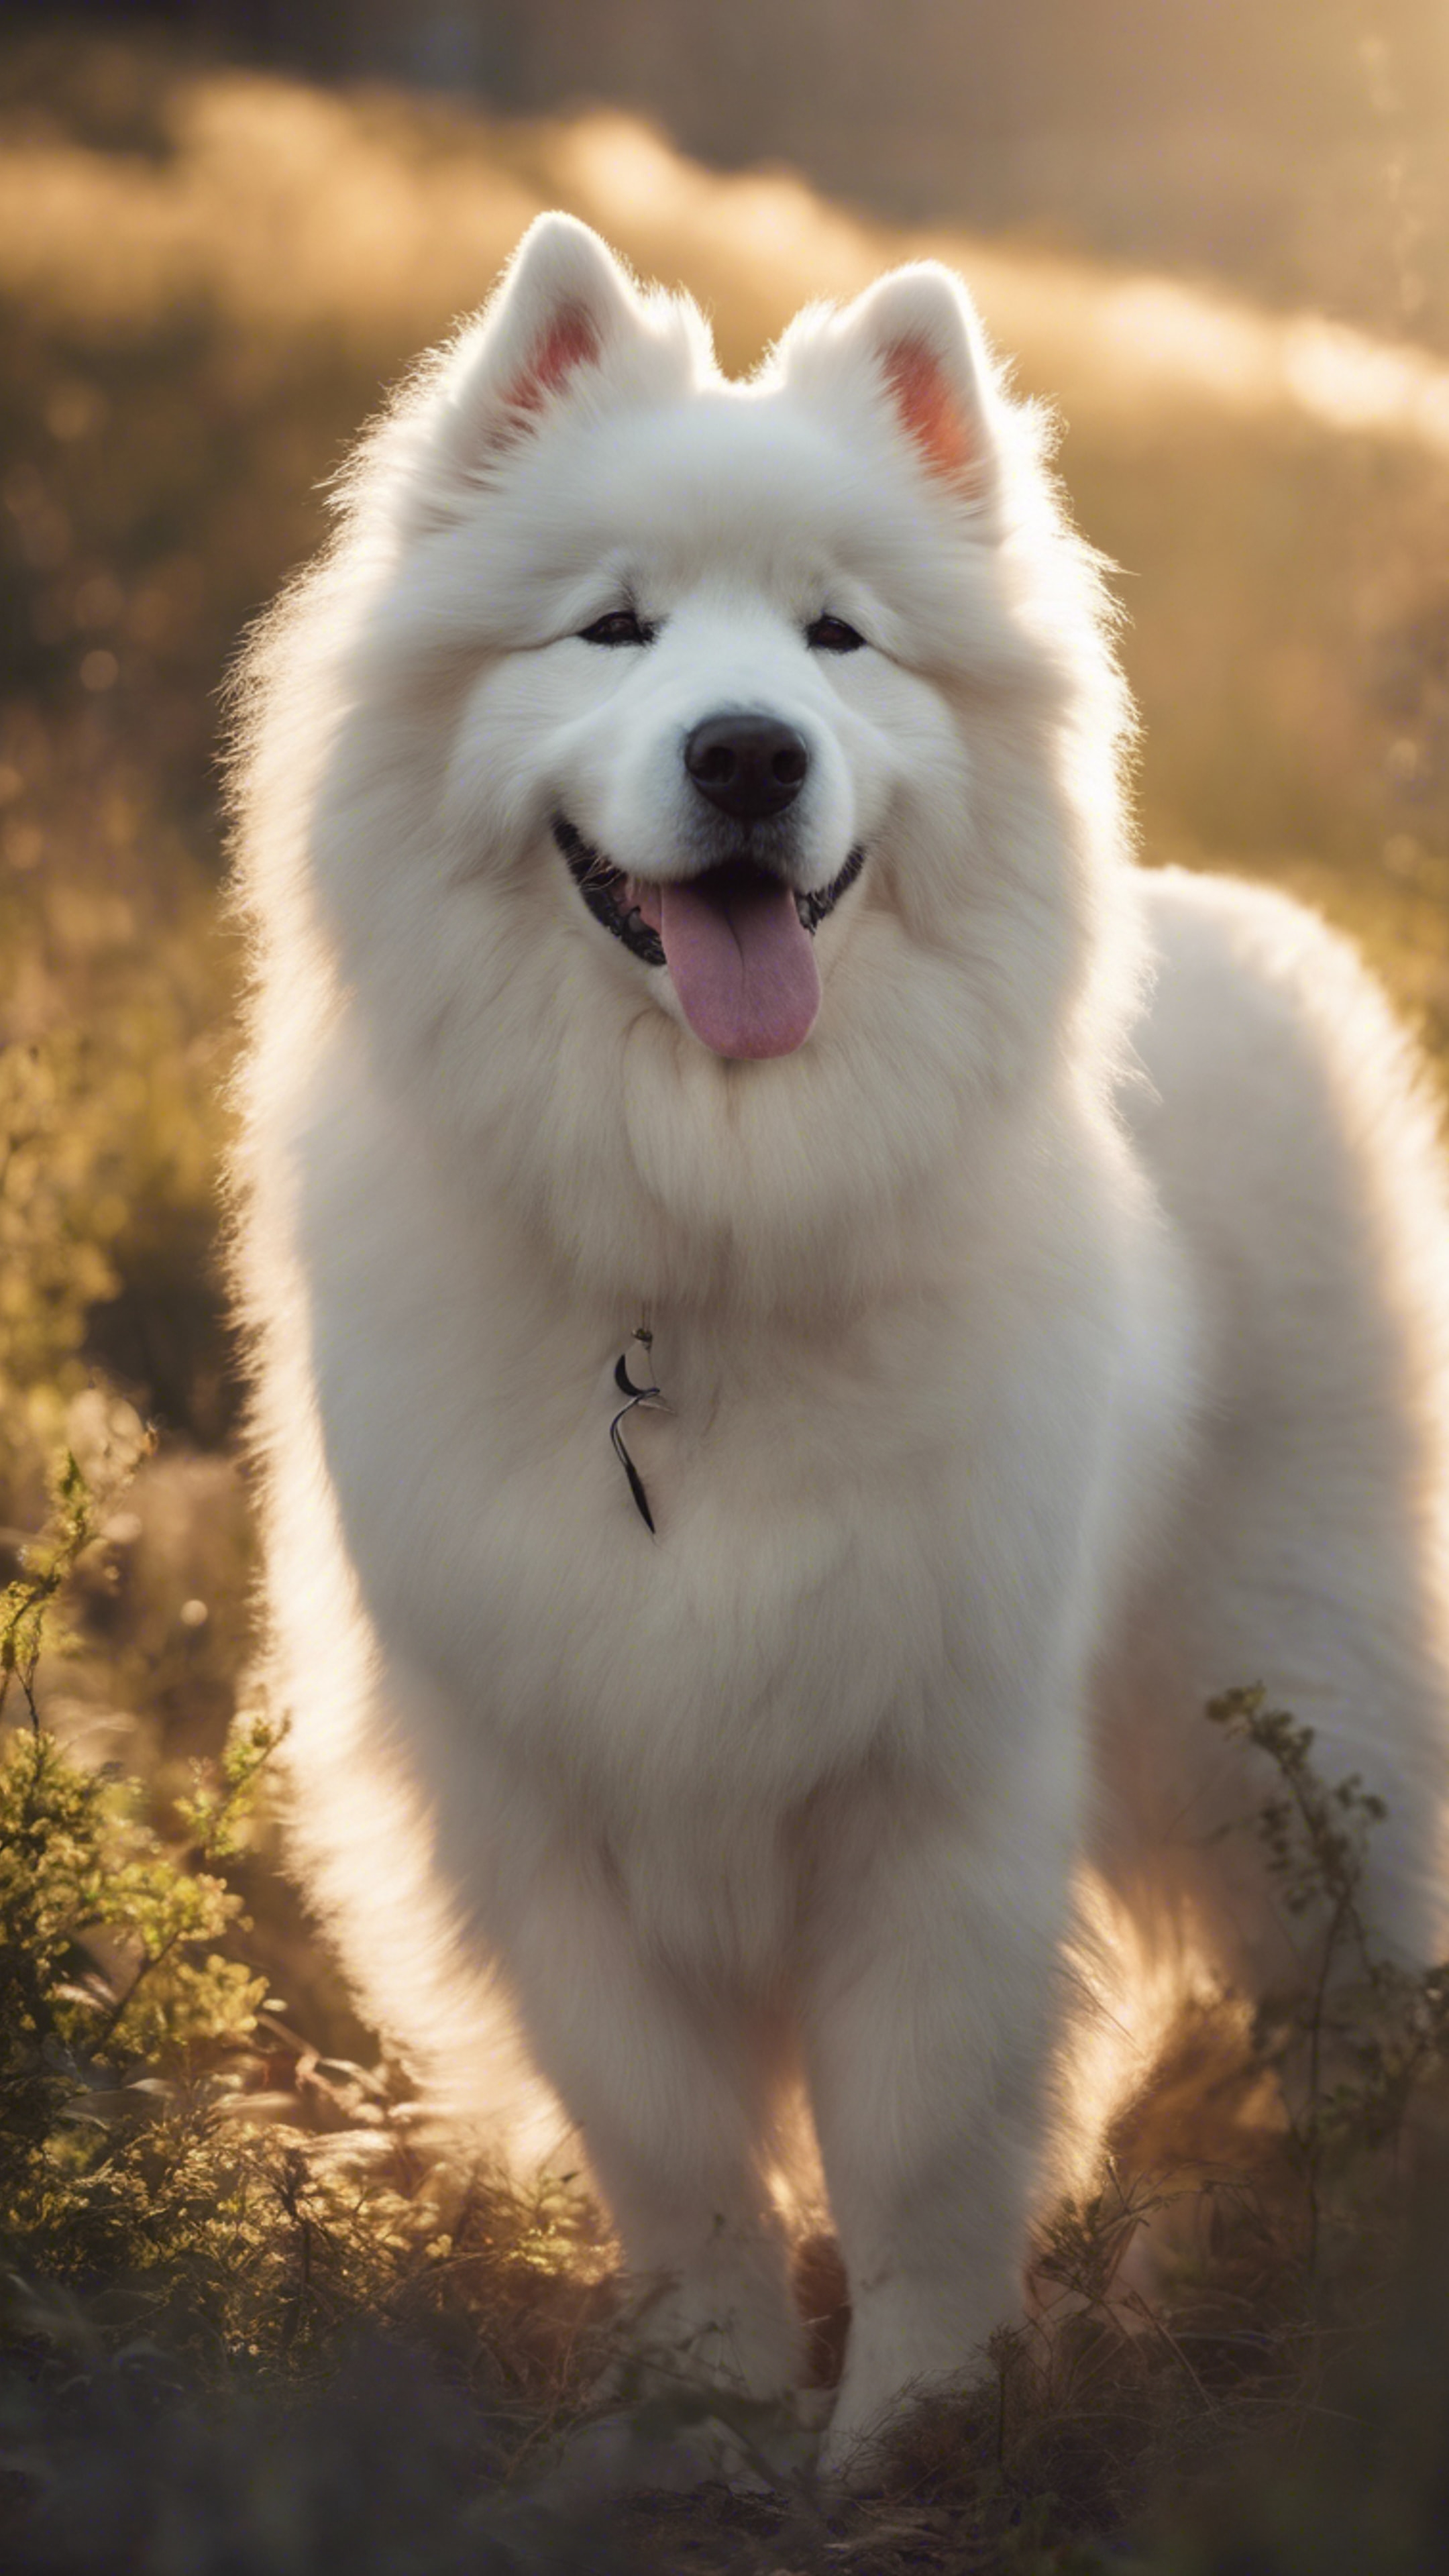 The white fur of a fluffy samoyed dog backlight by evening sun rays.壁紙[cf3fec1605914412ac2e]